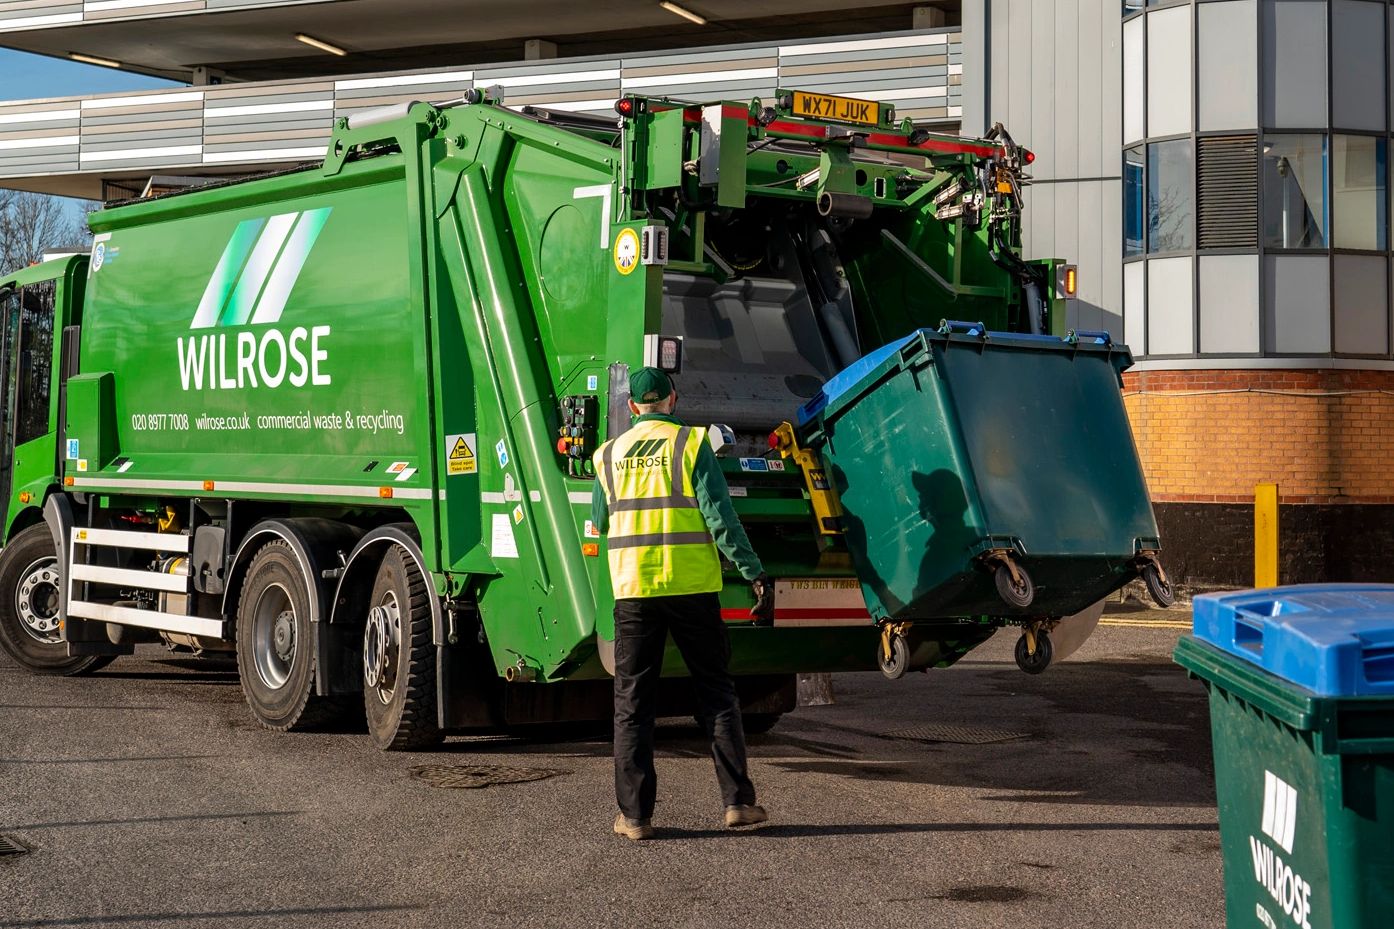 Dustcart in sutton loading commercial waste.  bin is halfway up and the general waste is going in.